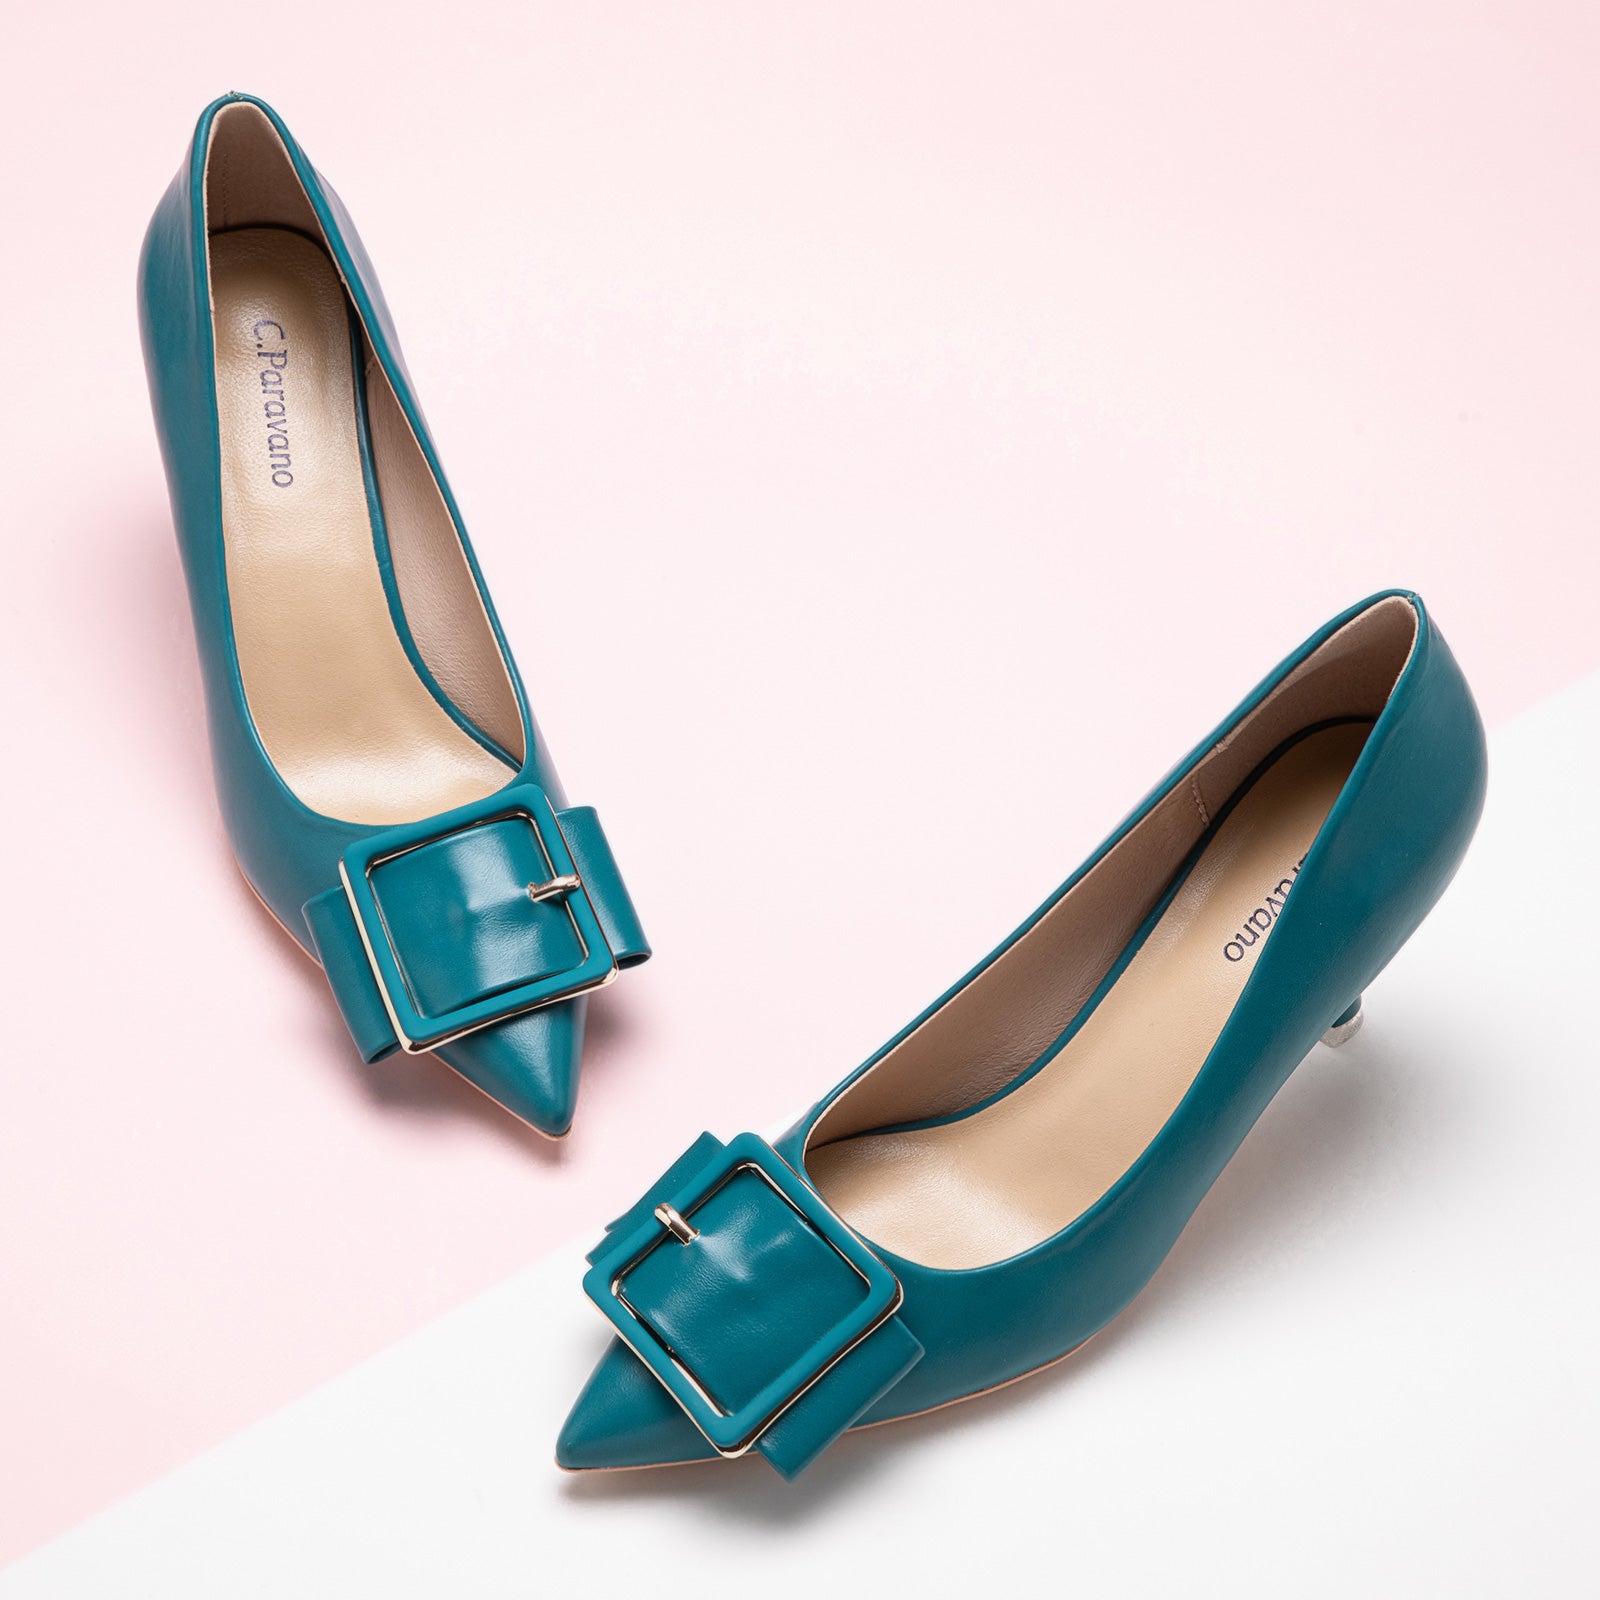 Elegant Square Buckled Pumps in Peacock Blue, a vibrant and eye-catching choice for a bold and stylish look